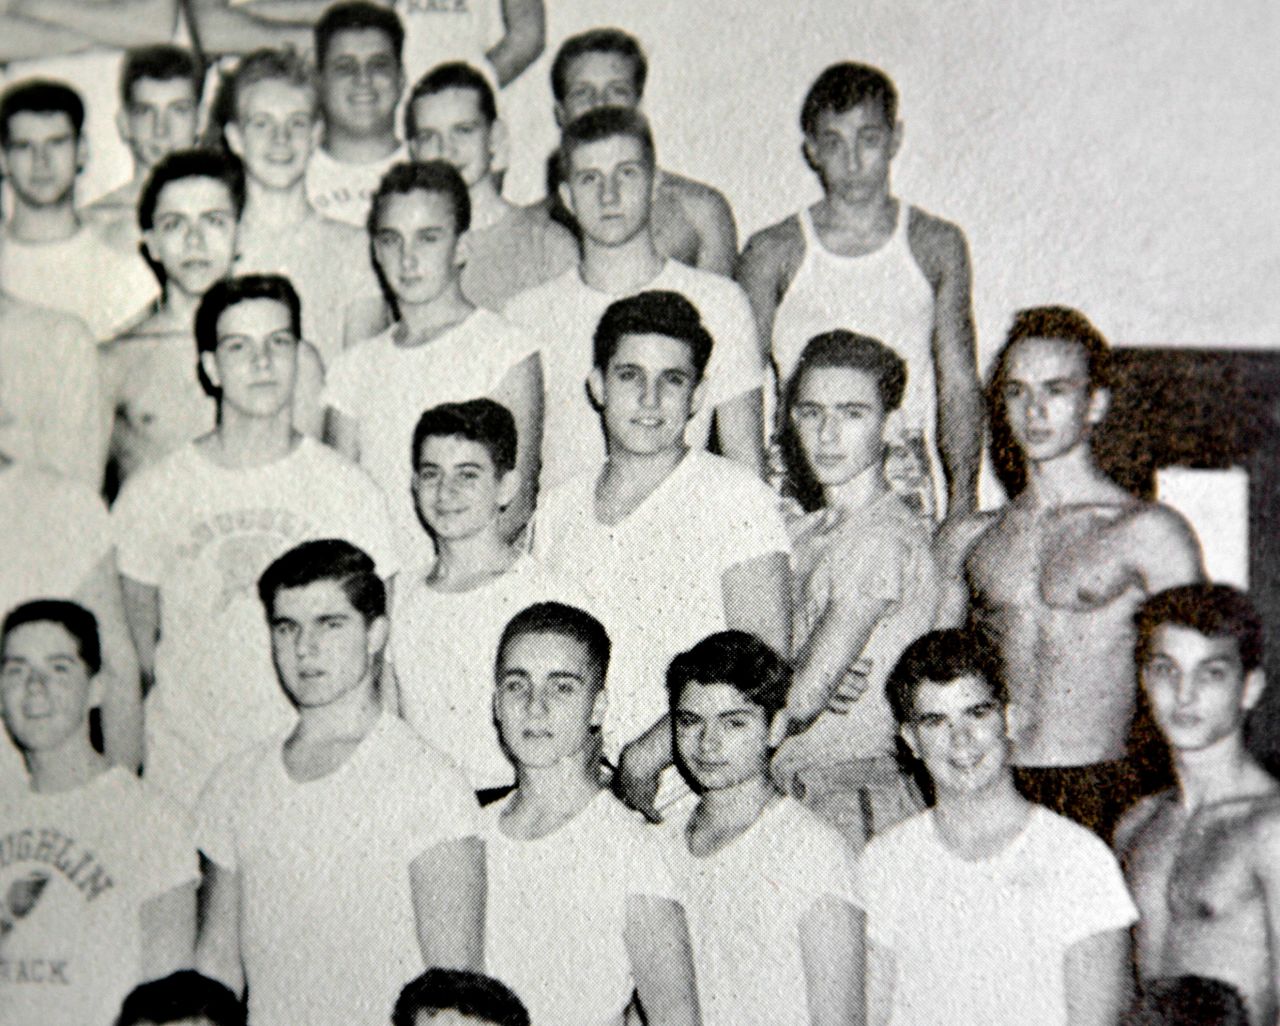 A young Giuliani is seen in the second row, third from right, in this high school yearbook photo from 1960. Giuliani is posing with other members of the weightlifting team at New York's Bishop Loughlin Memorial High School.